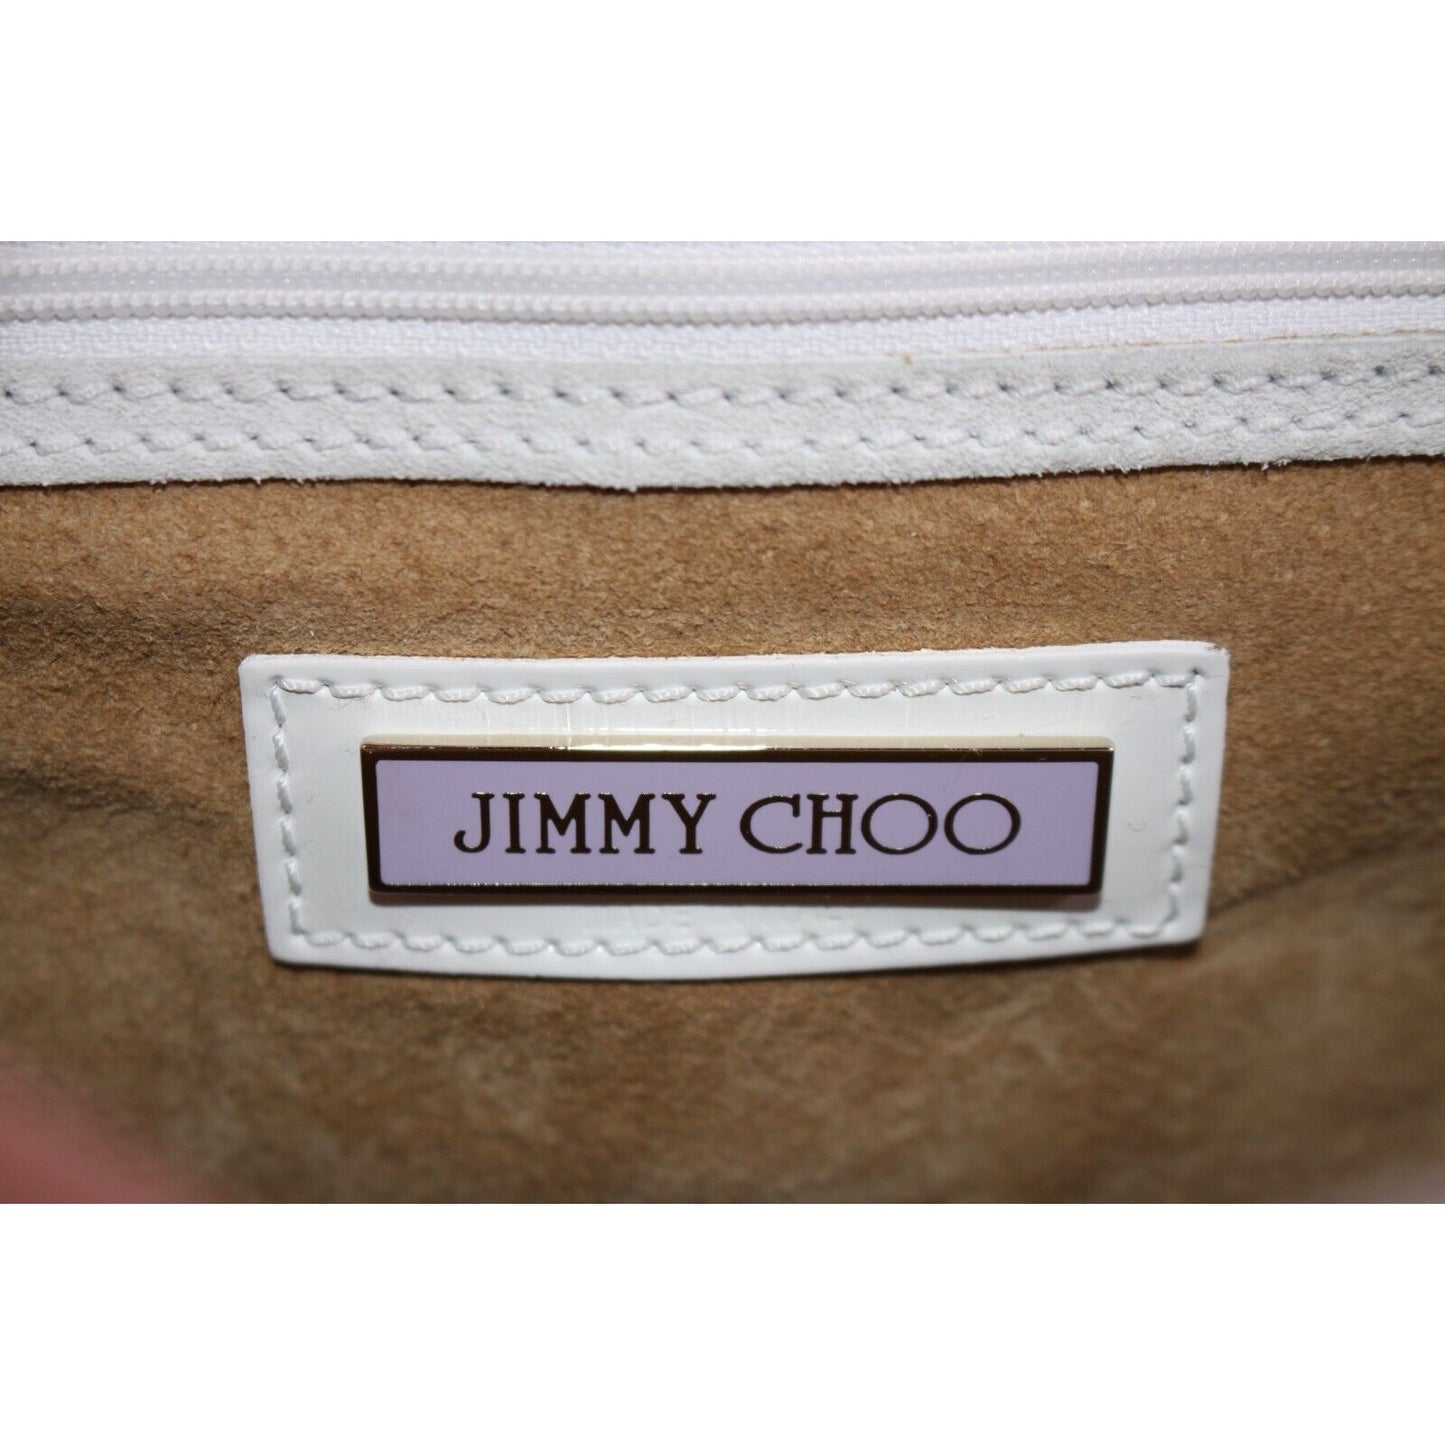 Jimmy Choo pale yellow glossy leather shoulder bag with gold hardware & belted sides